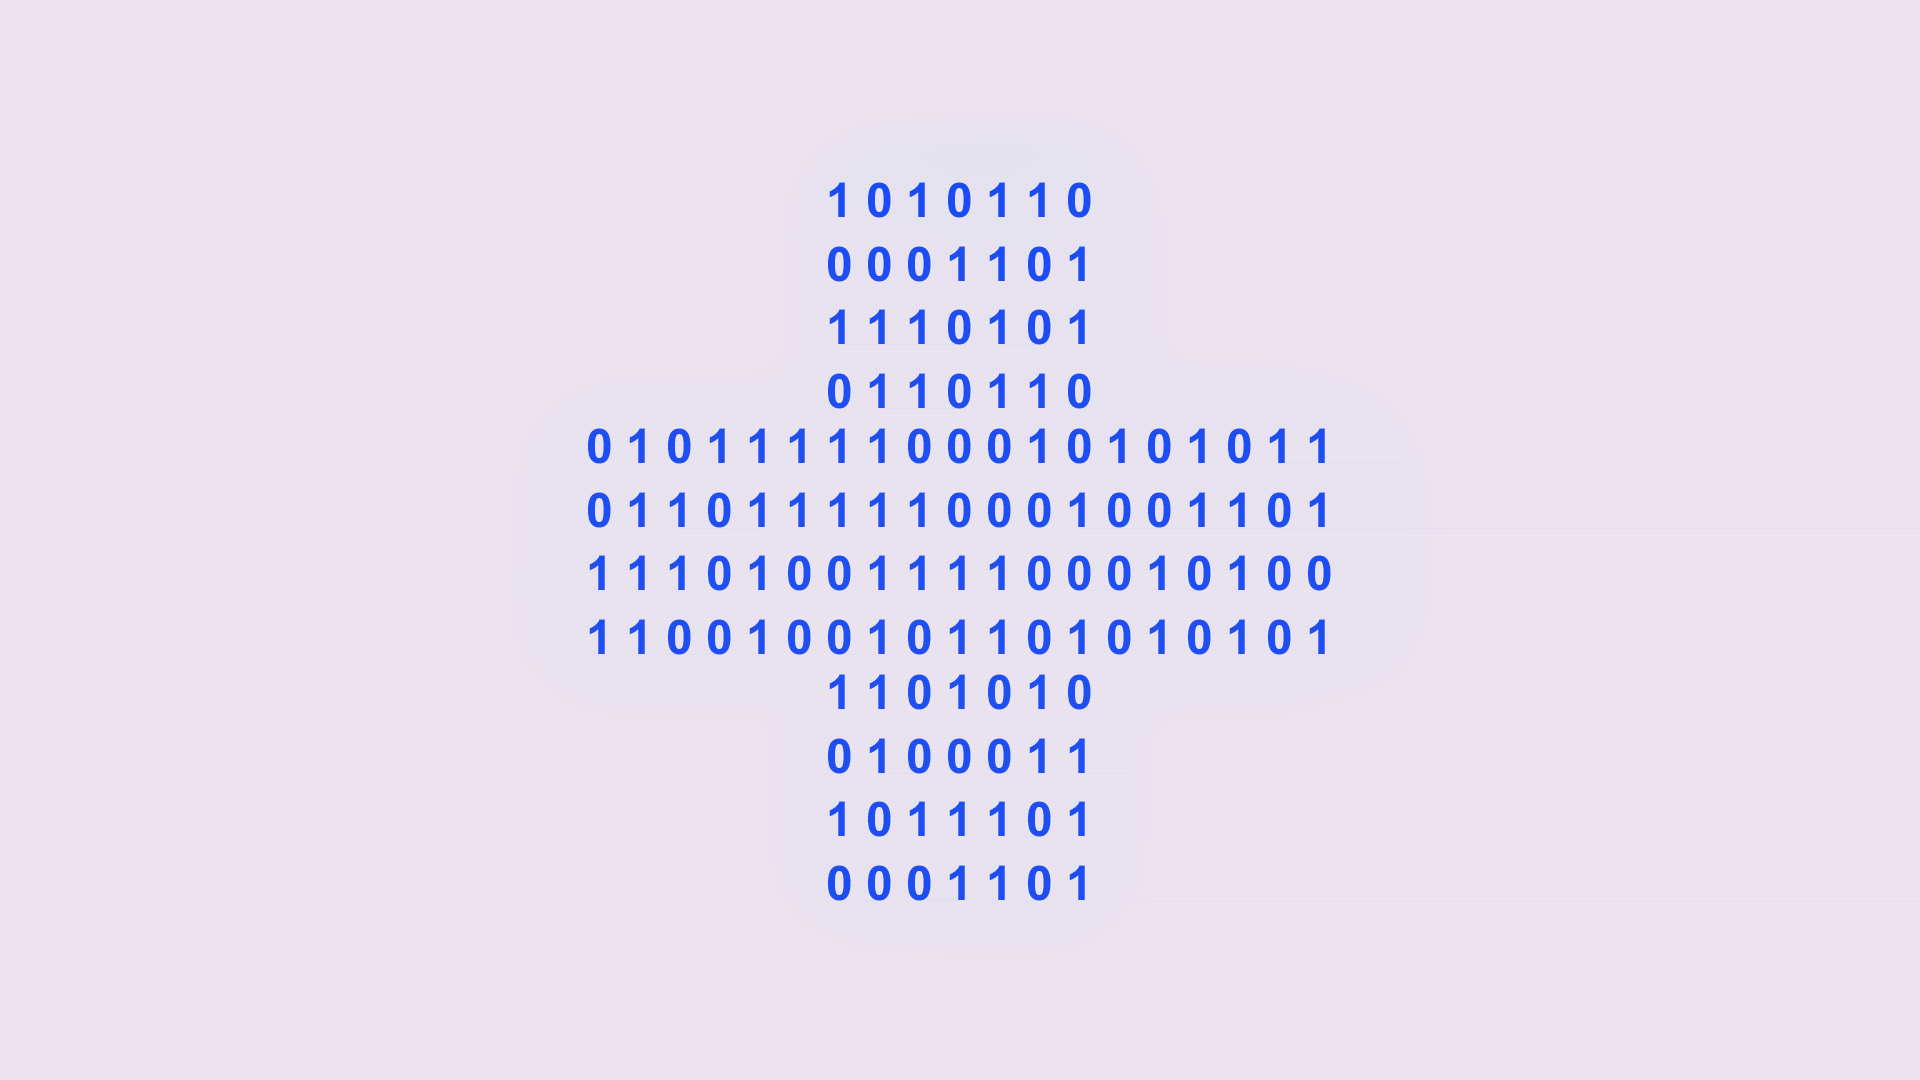 Gif of binary code in the shape of a cross.